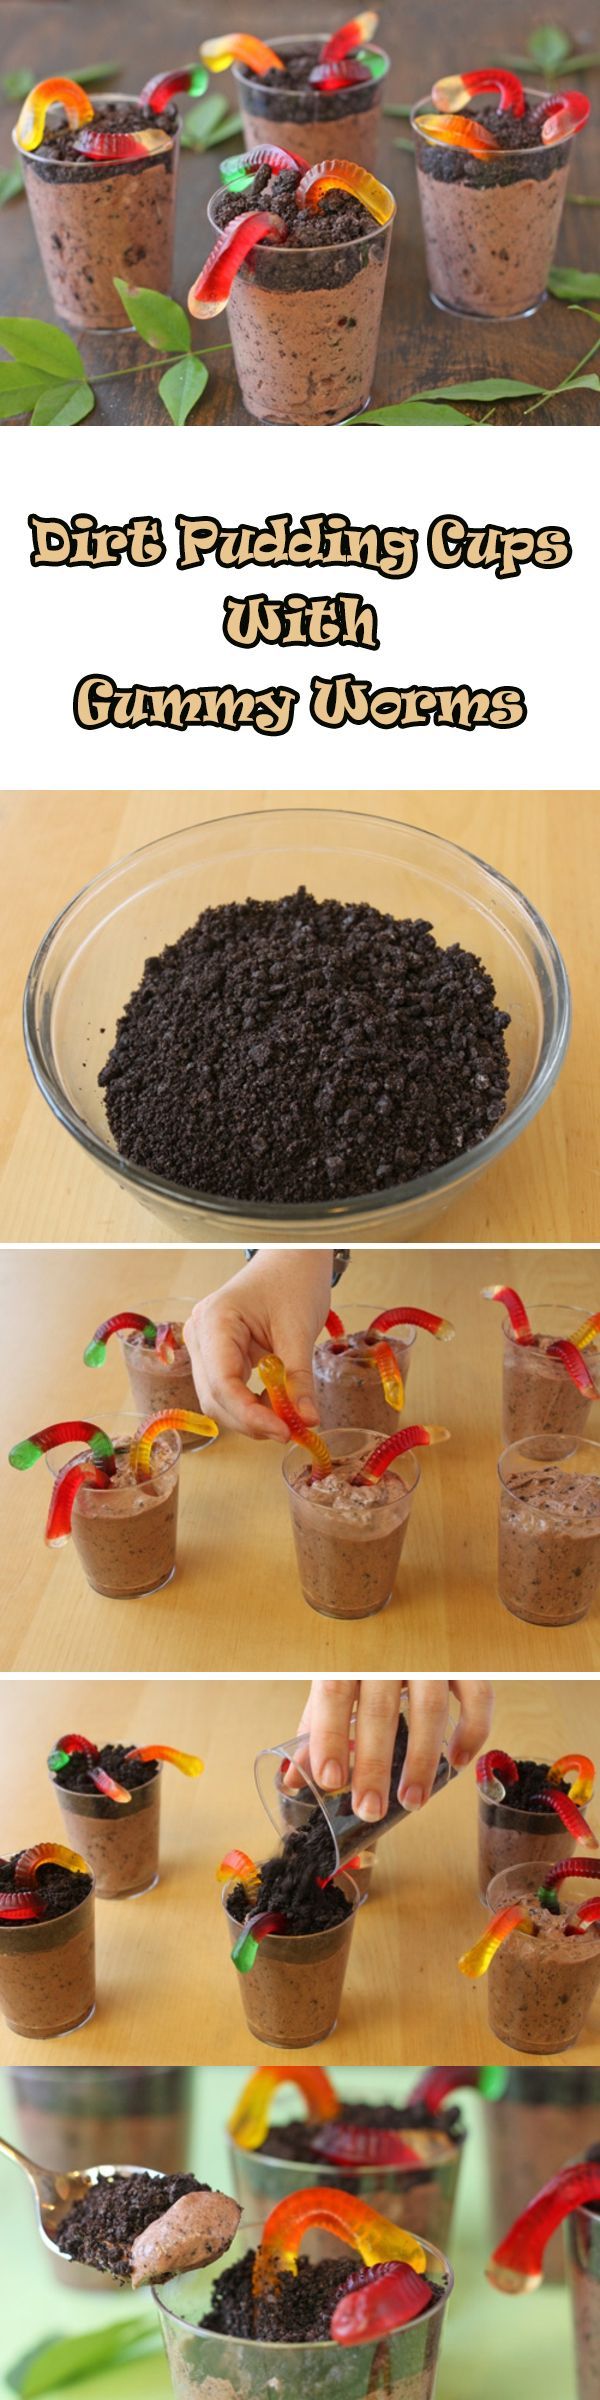 “Worms in Dirt” may not sound appetizing, but the taste of this easy dessert will make you a